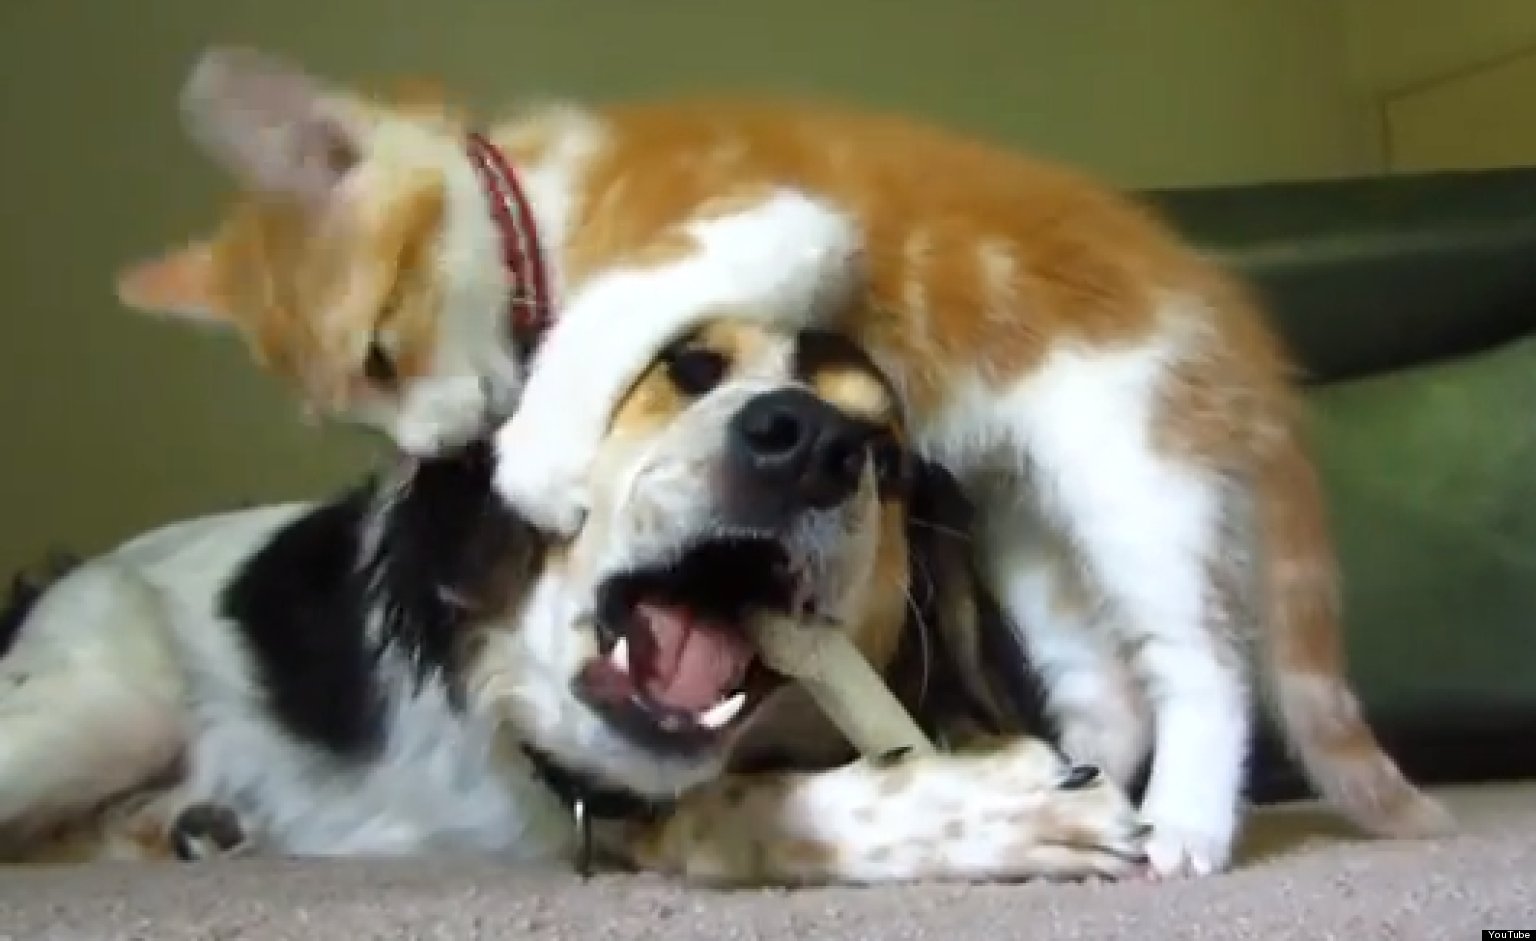 Cat Annoys Dog Trying To Eat A Bone, Cuteness Ensues (VIDEO)